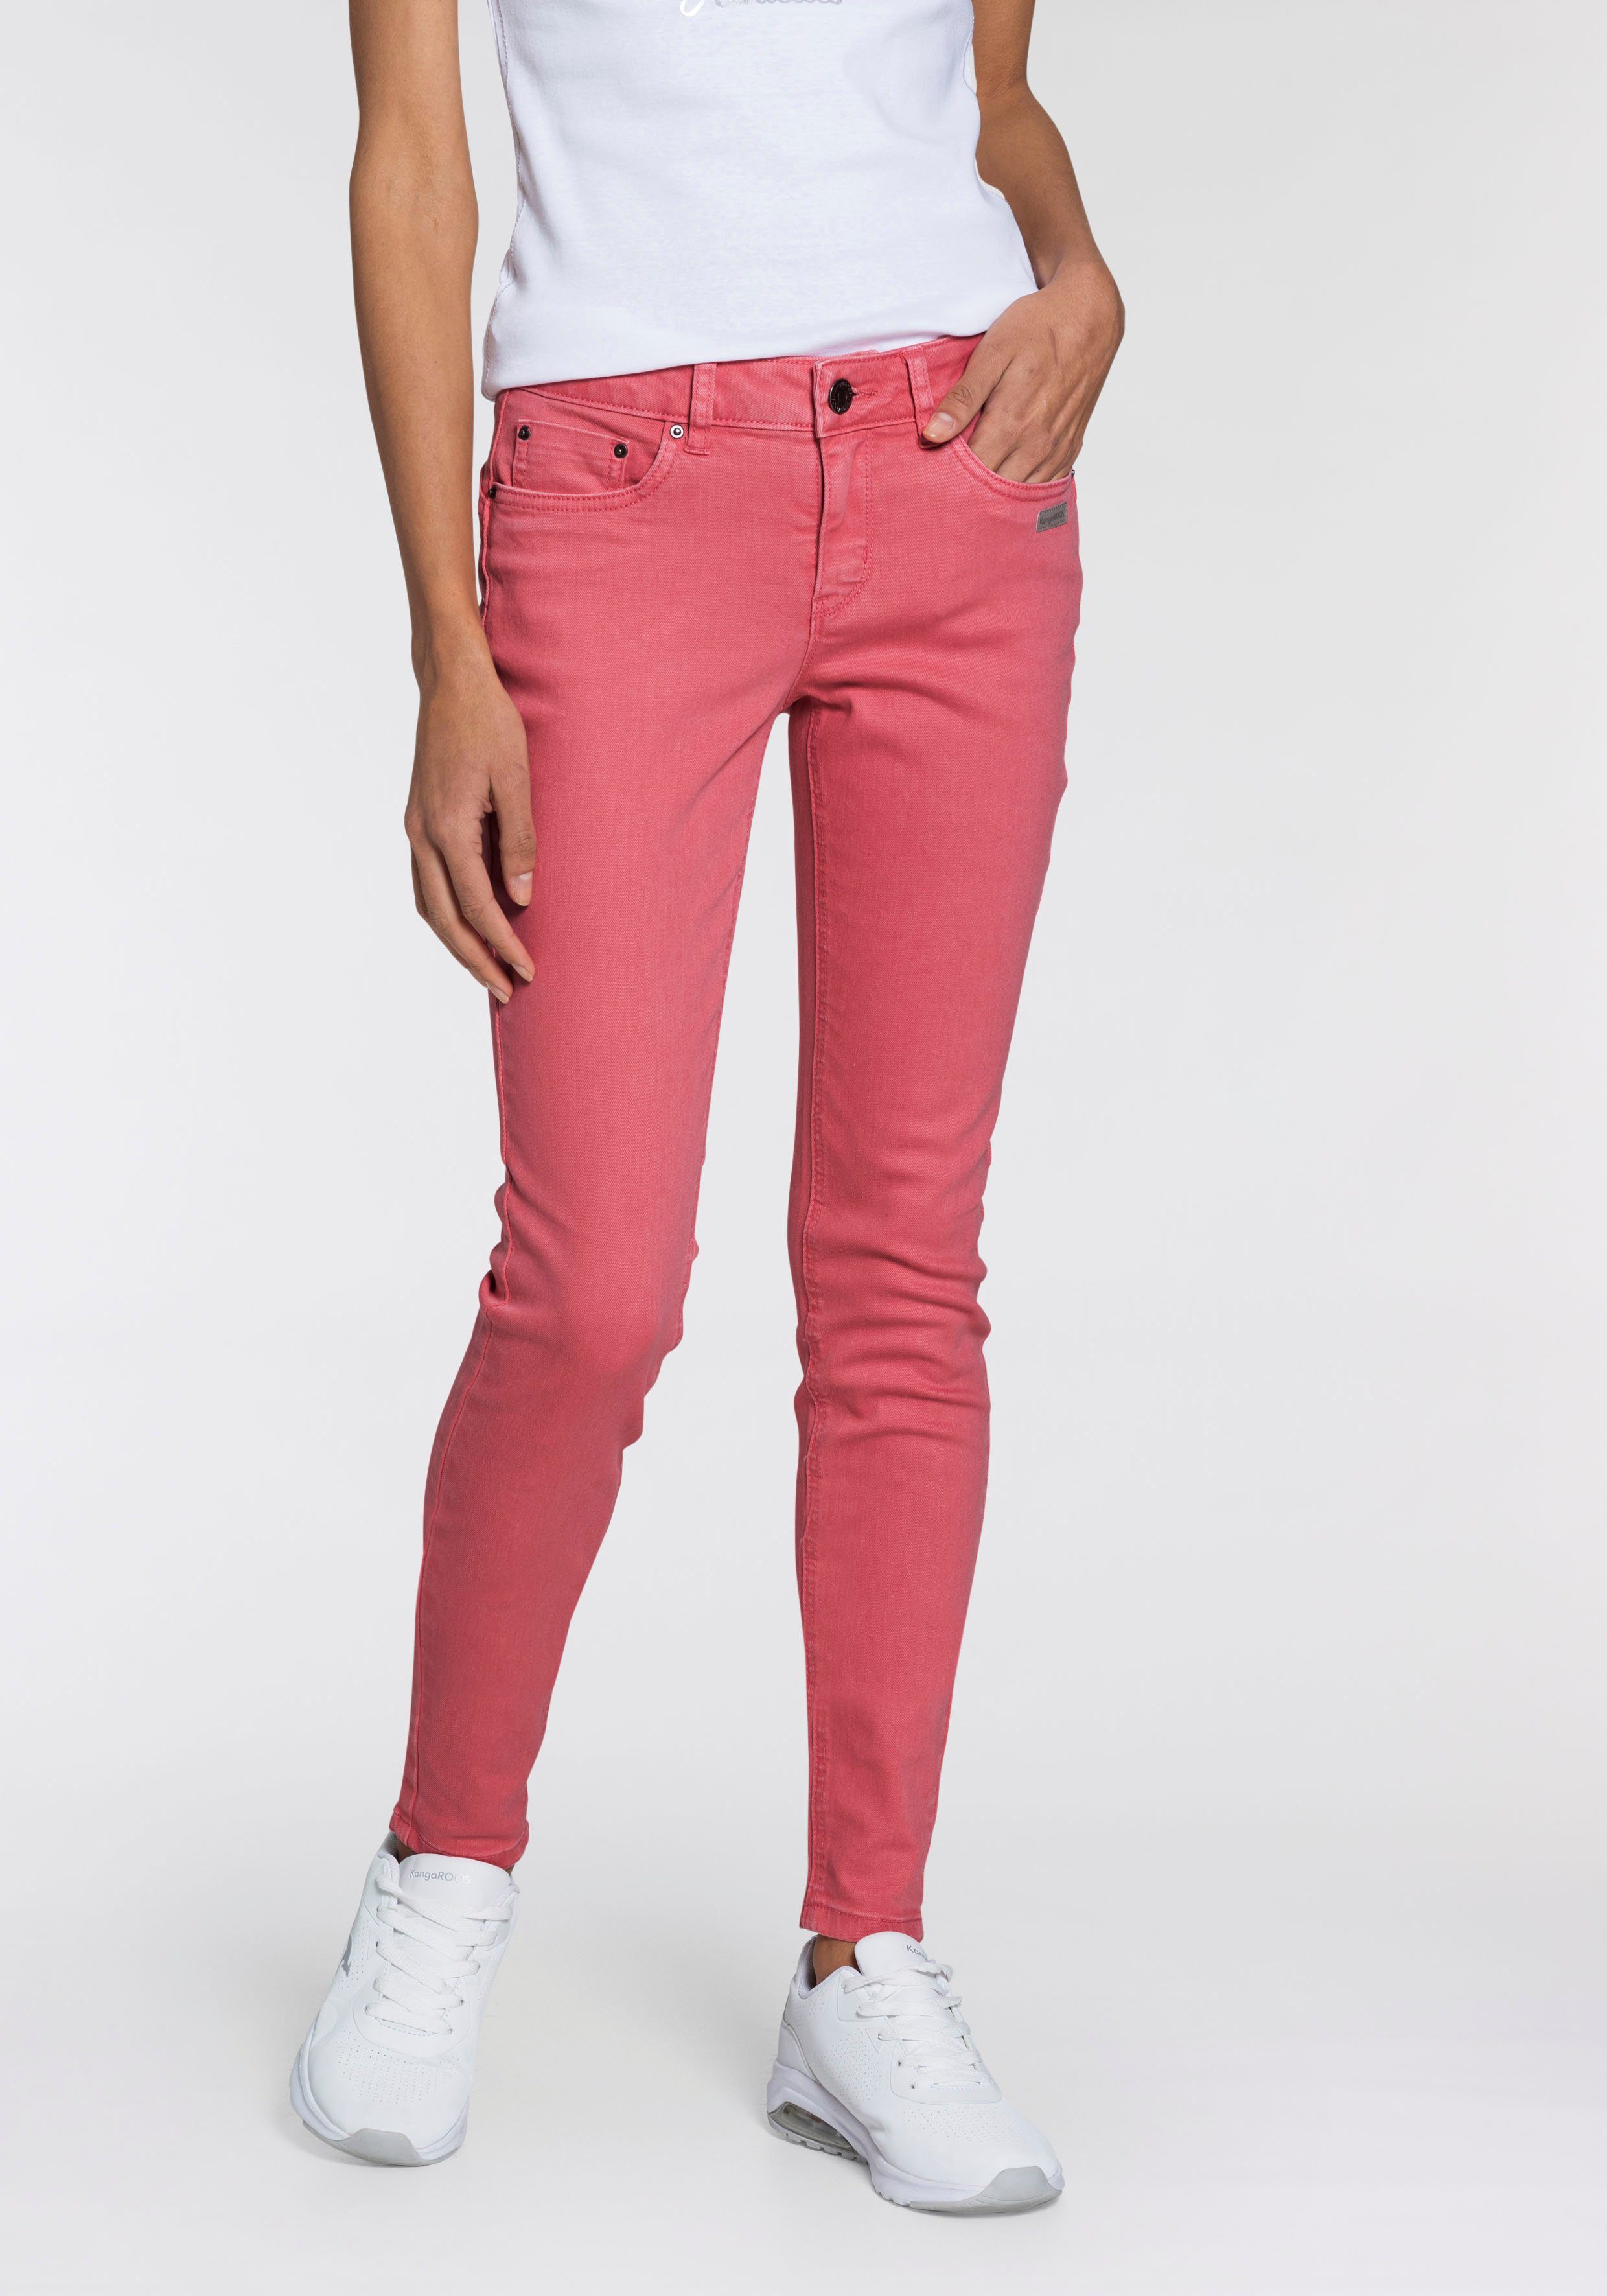 Rosa Jeans online kaufen » Jeans in pink | OTTO